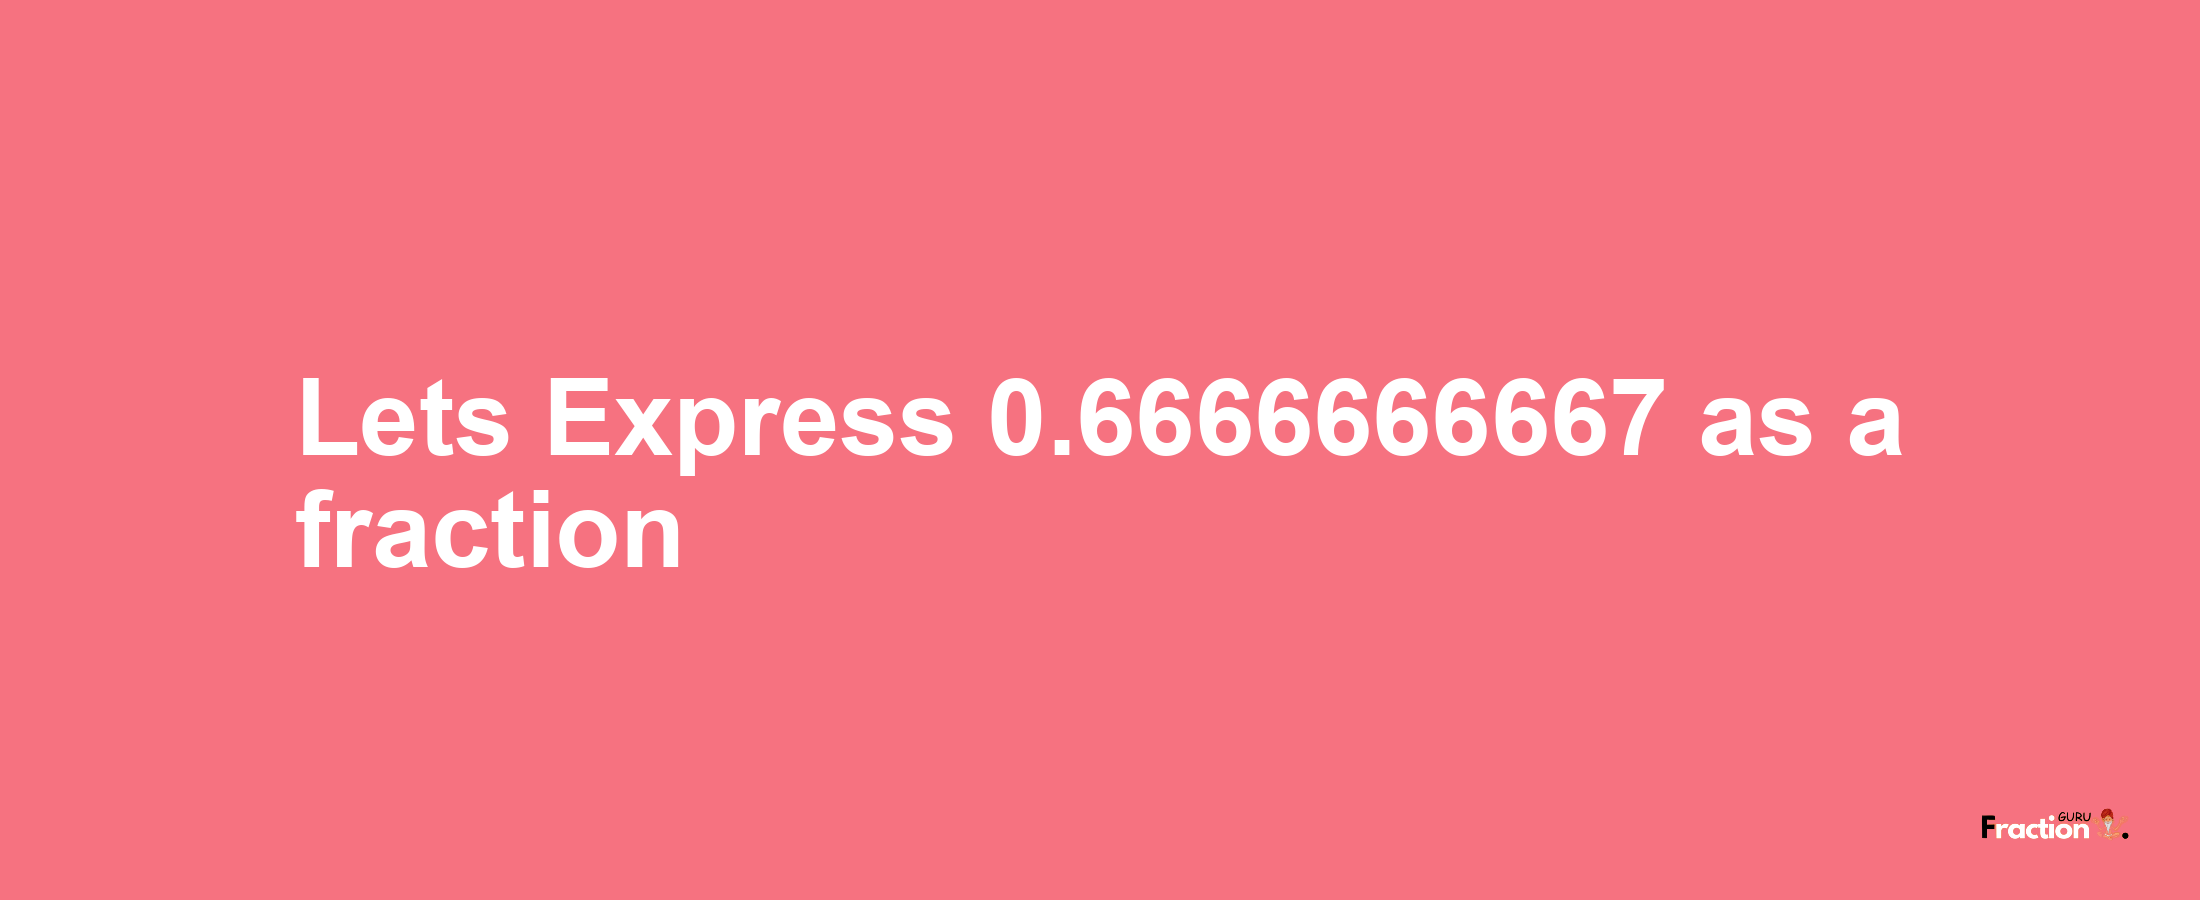 Lets Express 0.6666666667 as afraction